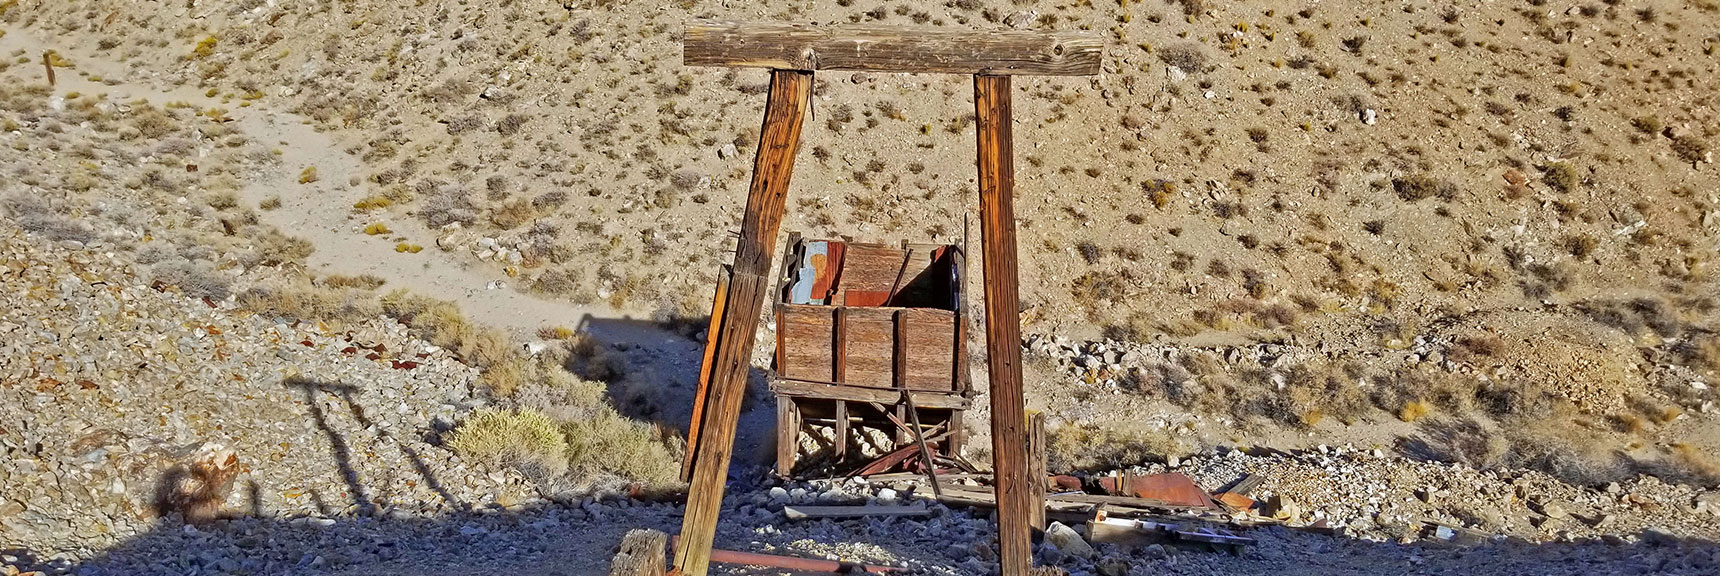 Precursor to the Skidoo Stamp Mill? | Skidoo Stamp Mill, Panamint Mountains, Death Valley National Park, CA